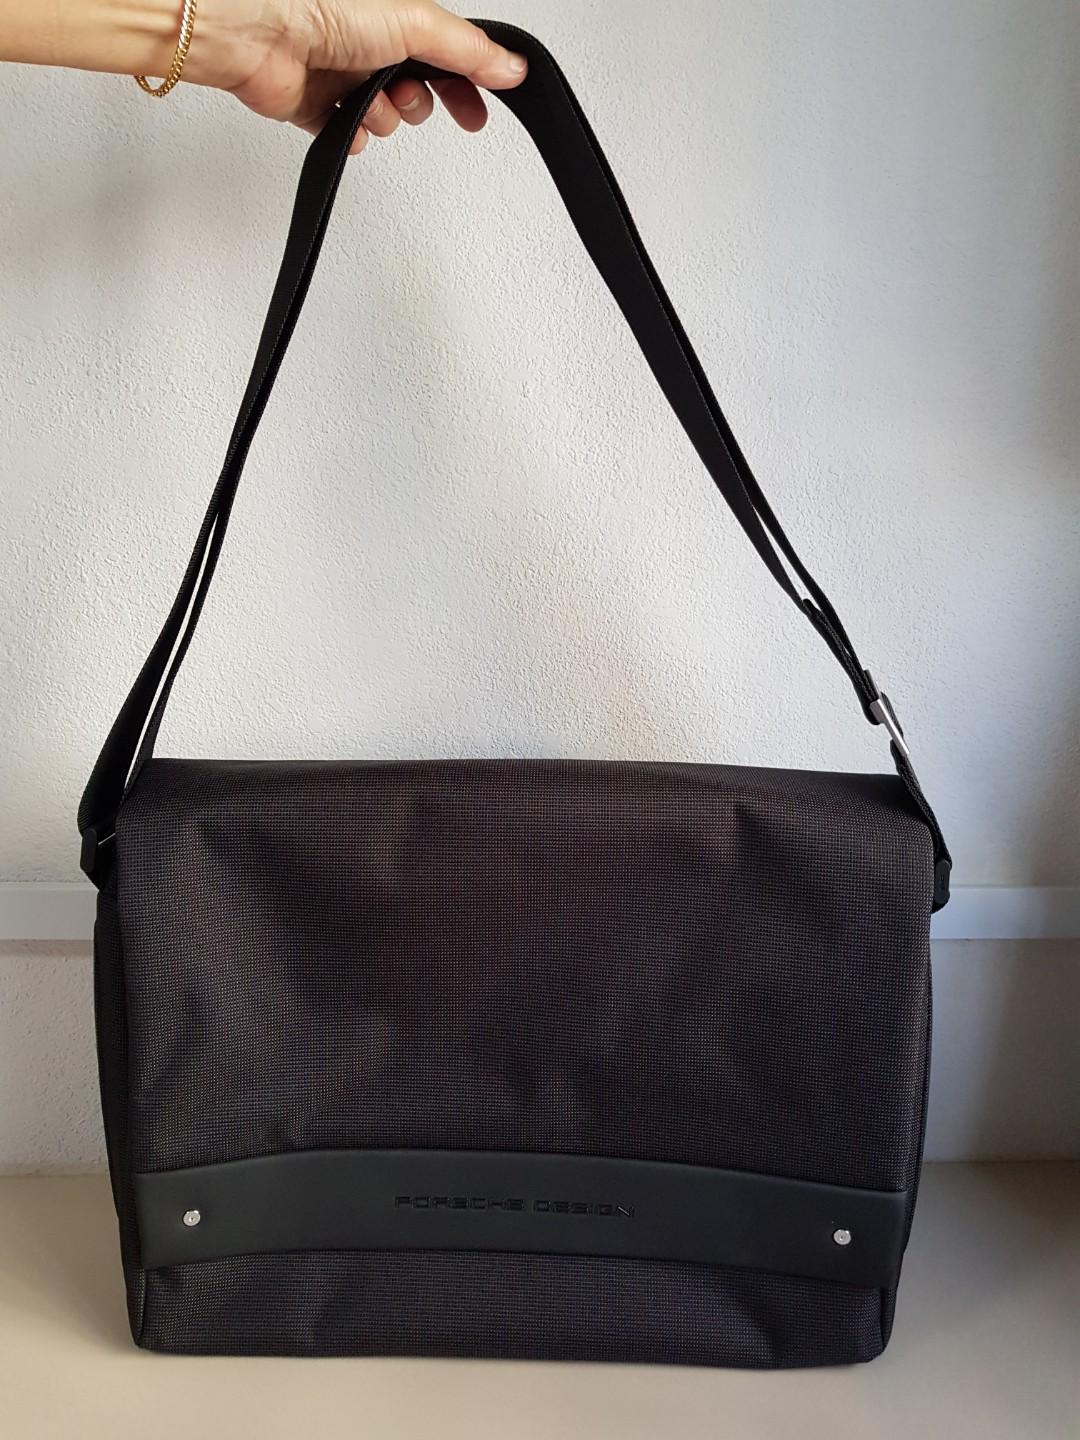 Porsche Design briefcase/sling bag, Luxury, Bags & Wallets on Carousell